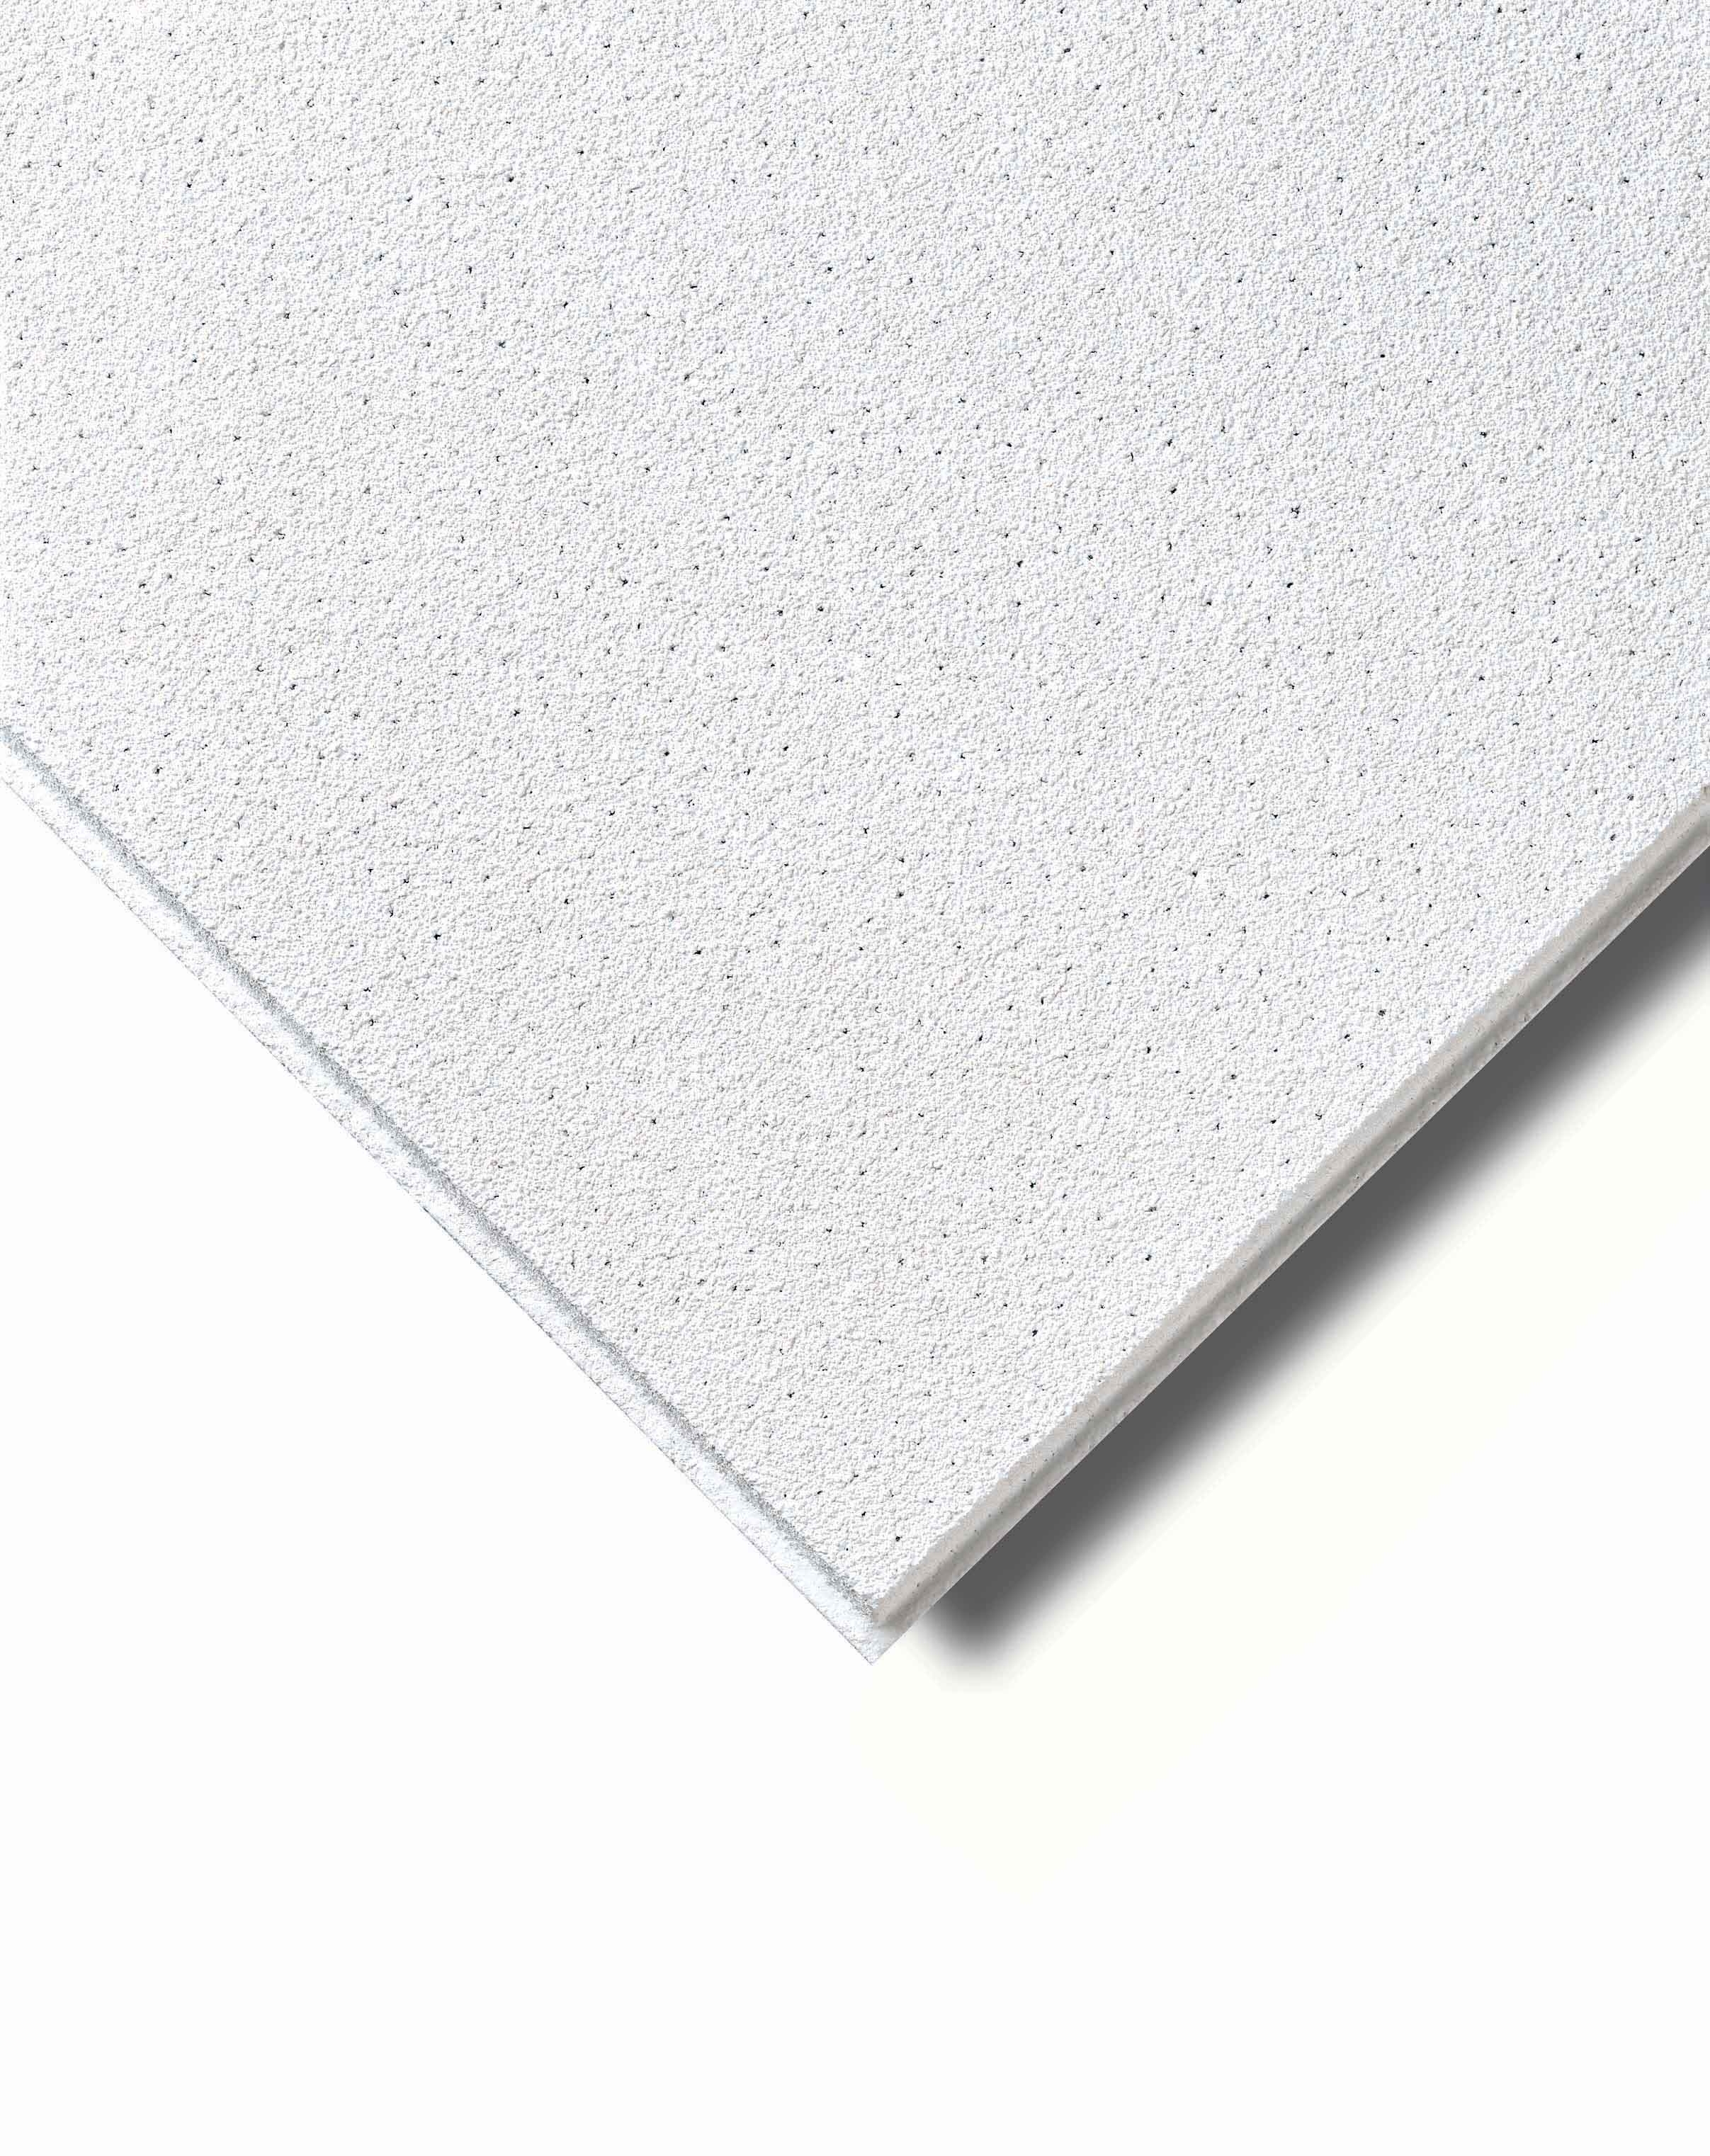 Permalink to Armstrong Dune Ceiling Tiles Data Sheet